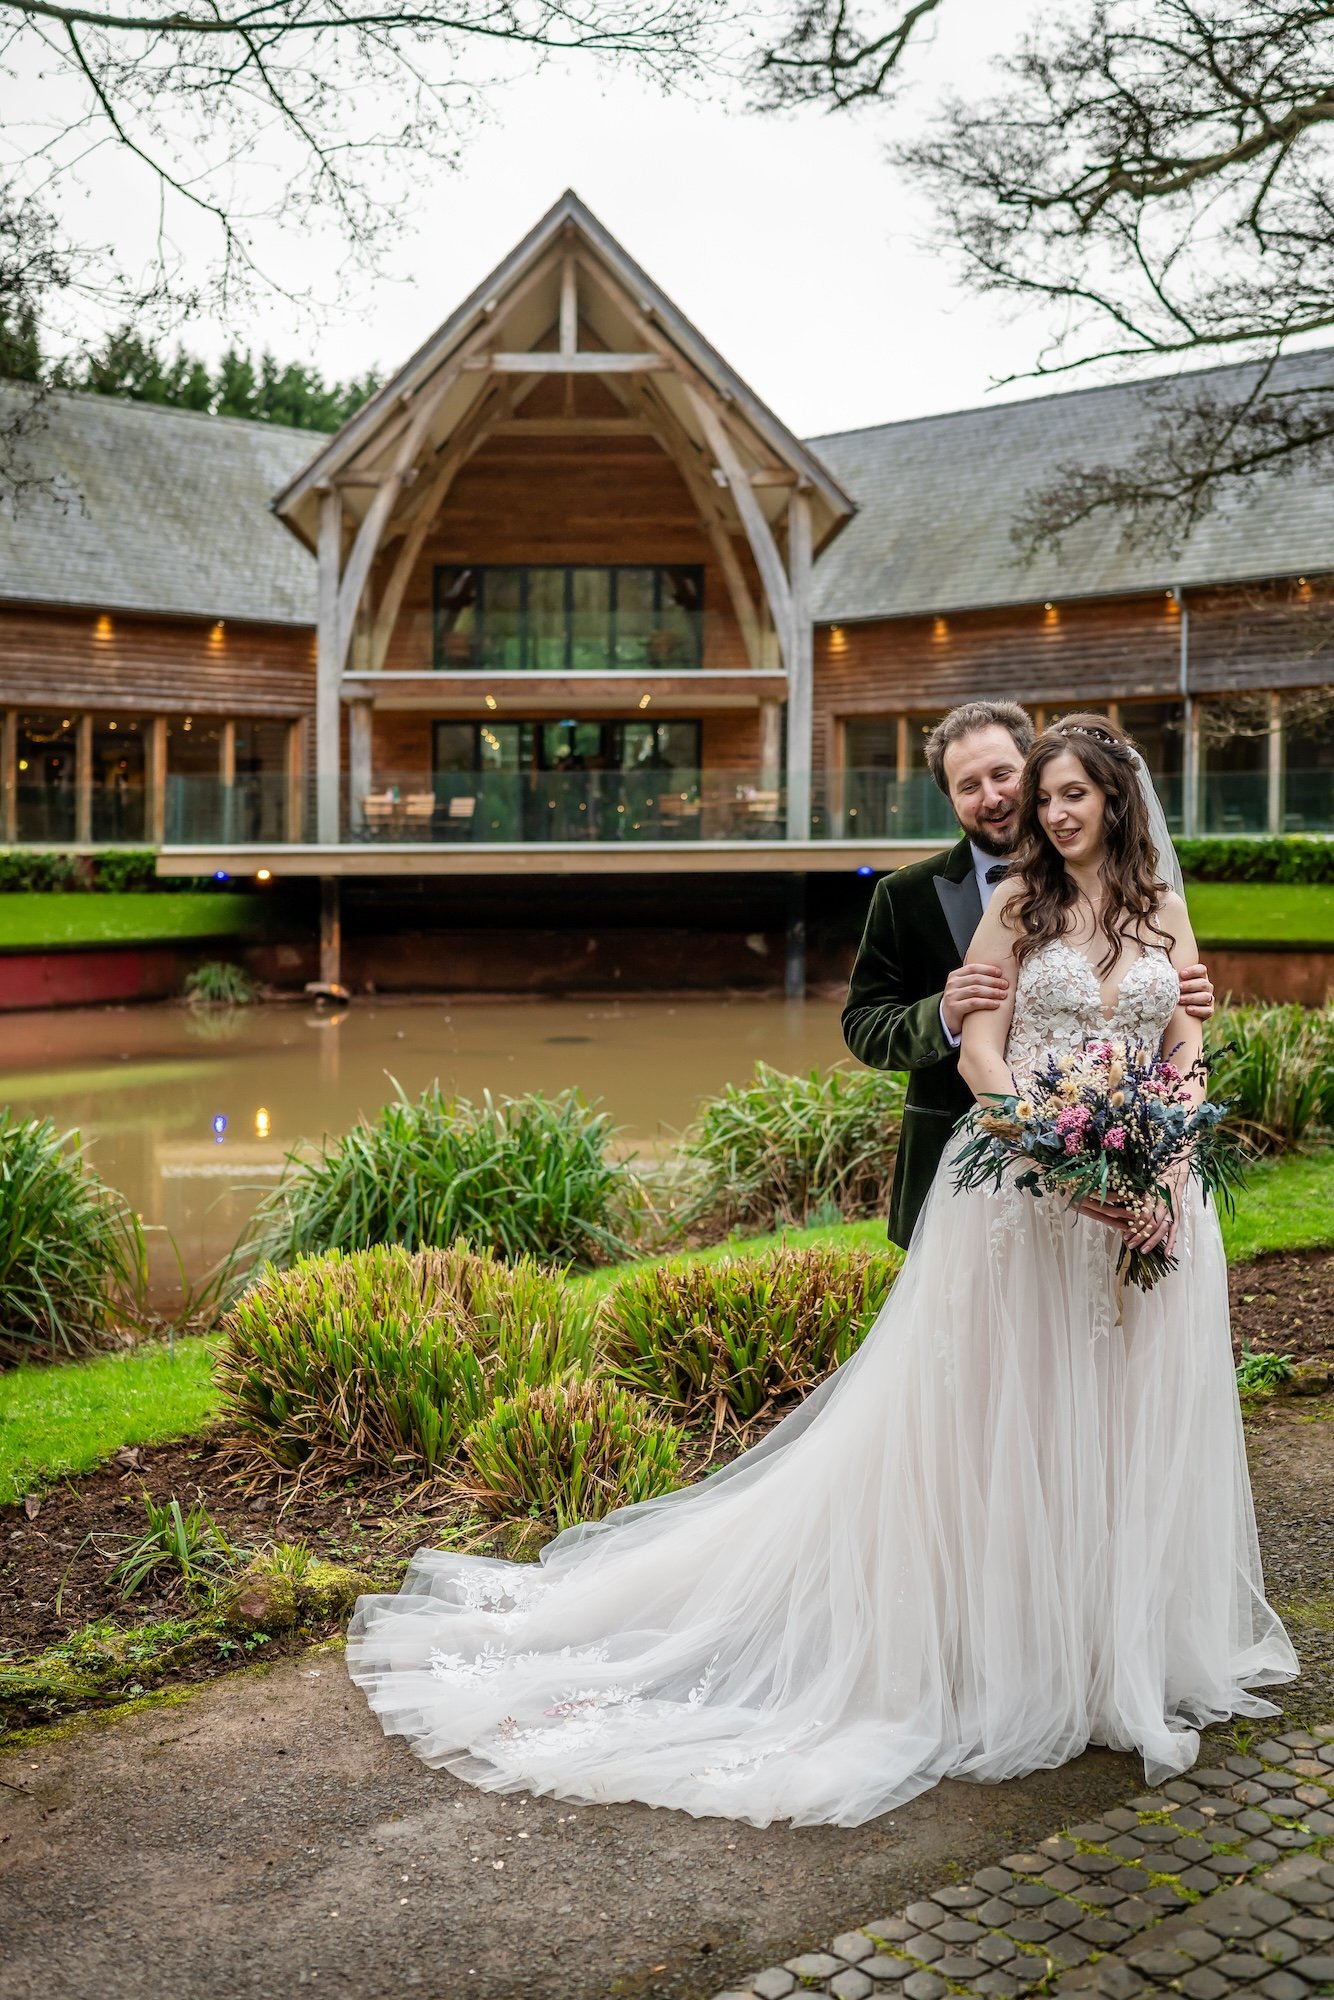 The Mill Barns Wedding Venue in the background for Jen and Tom